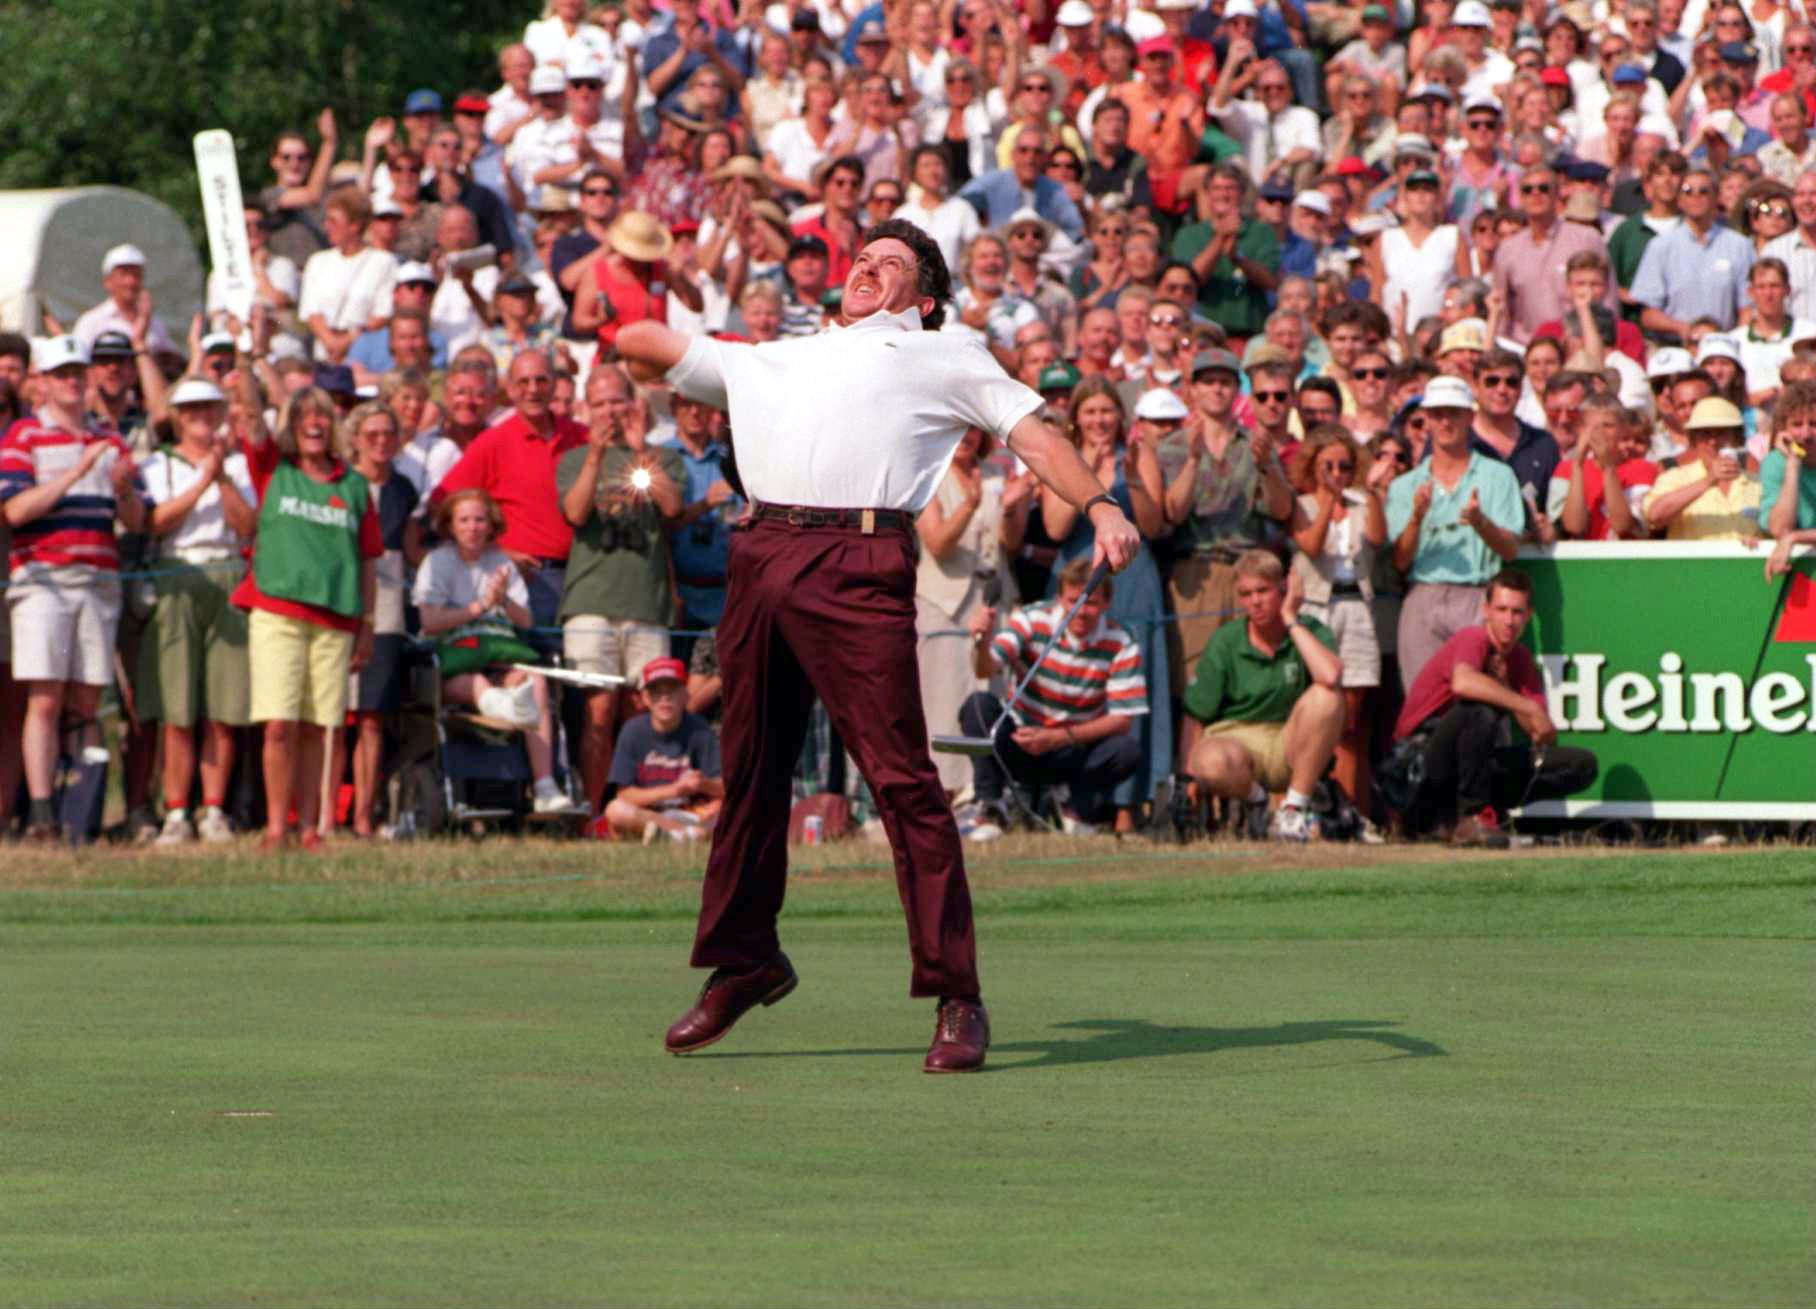 Jimenez's first win came at the Piaget Belgian Open in 1992 (Photo: Getty Images)